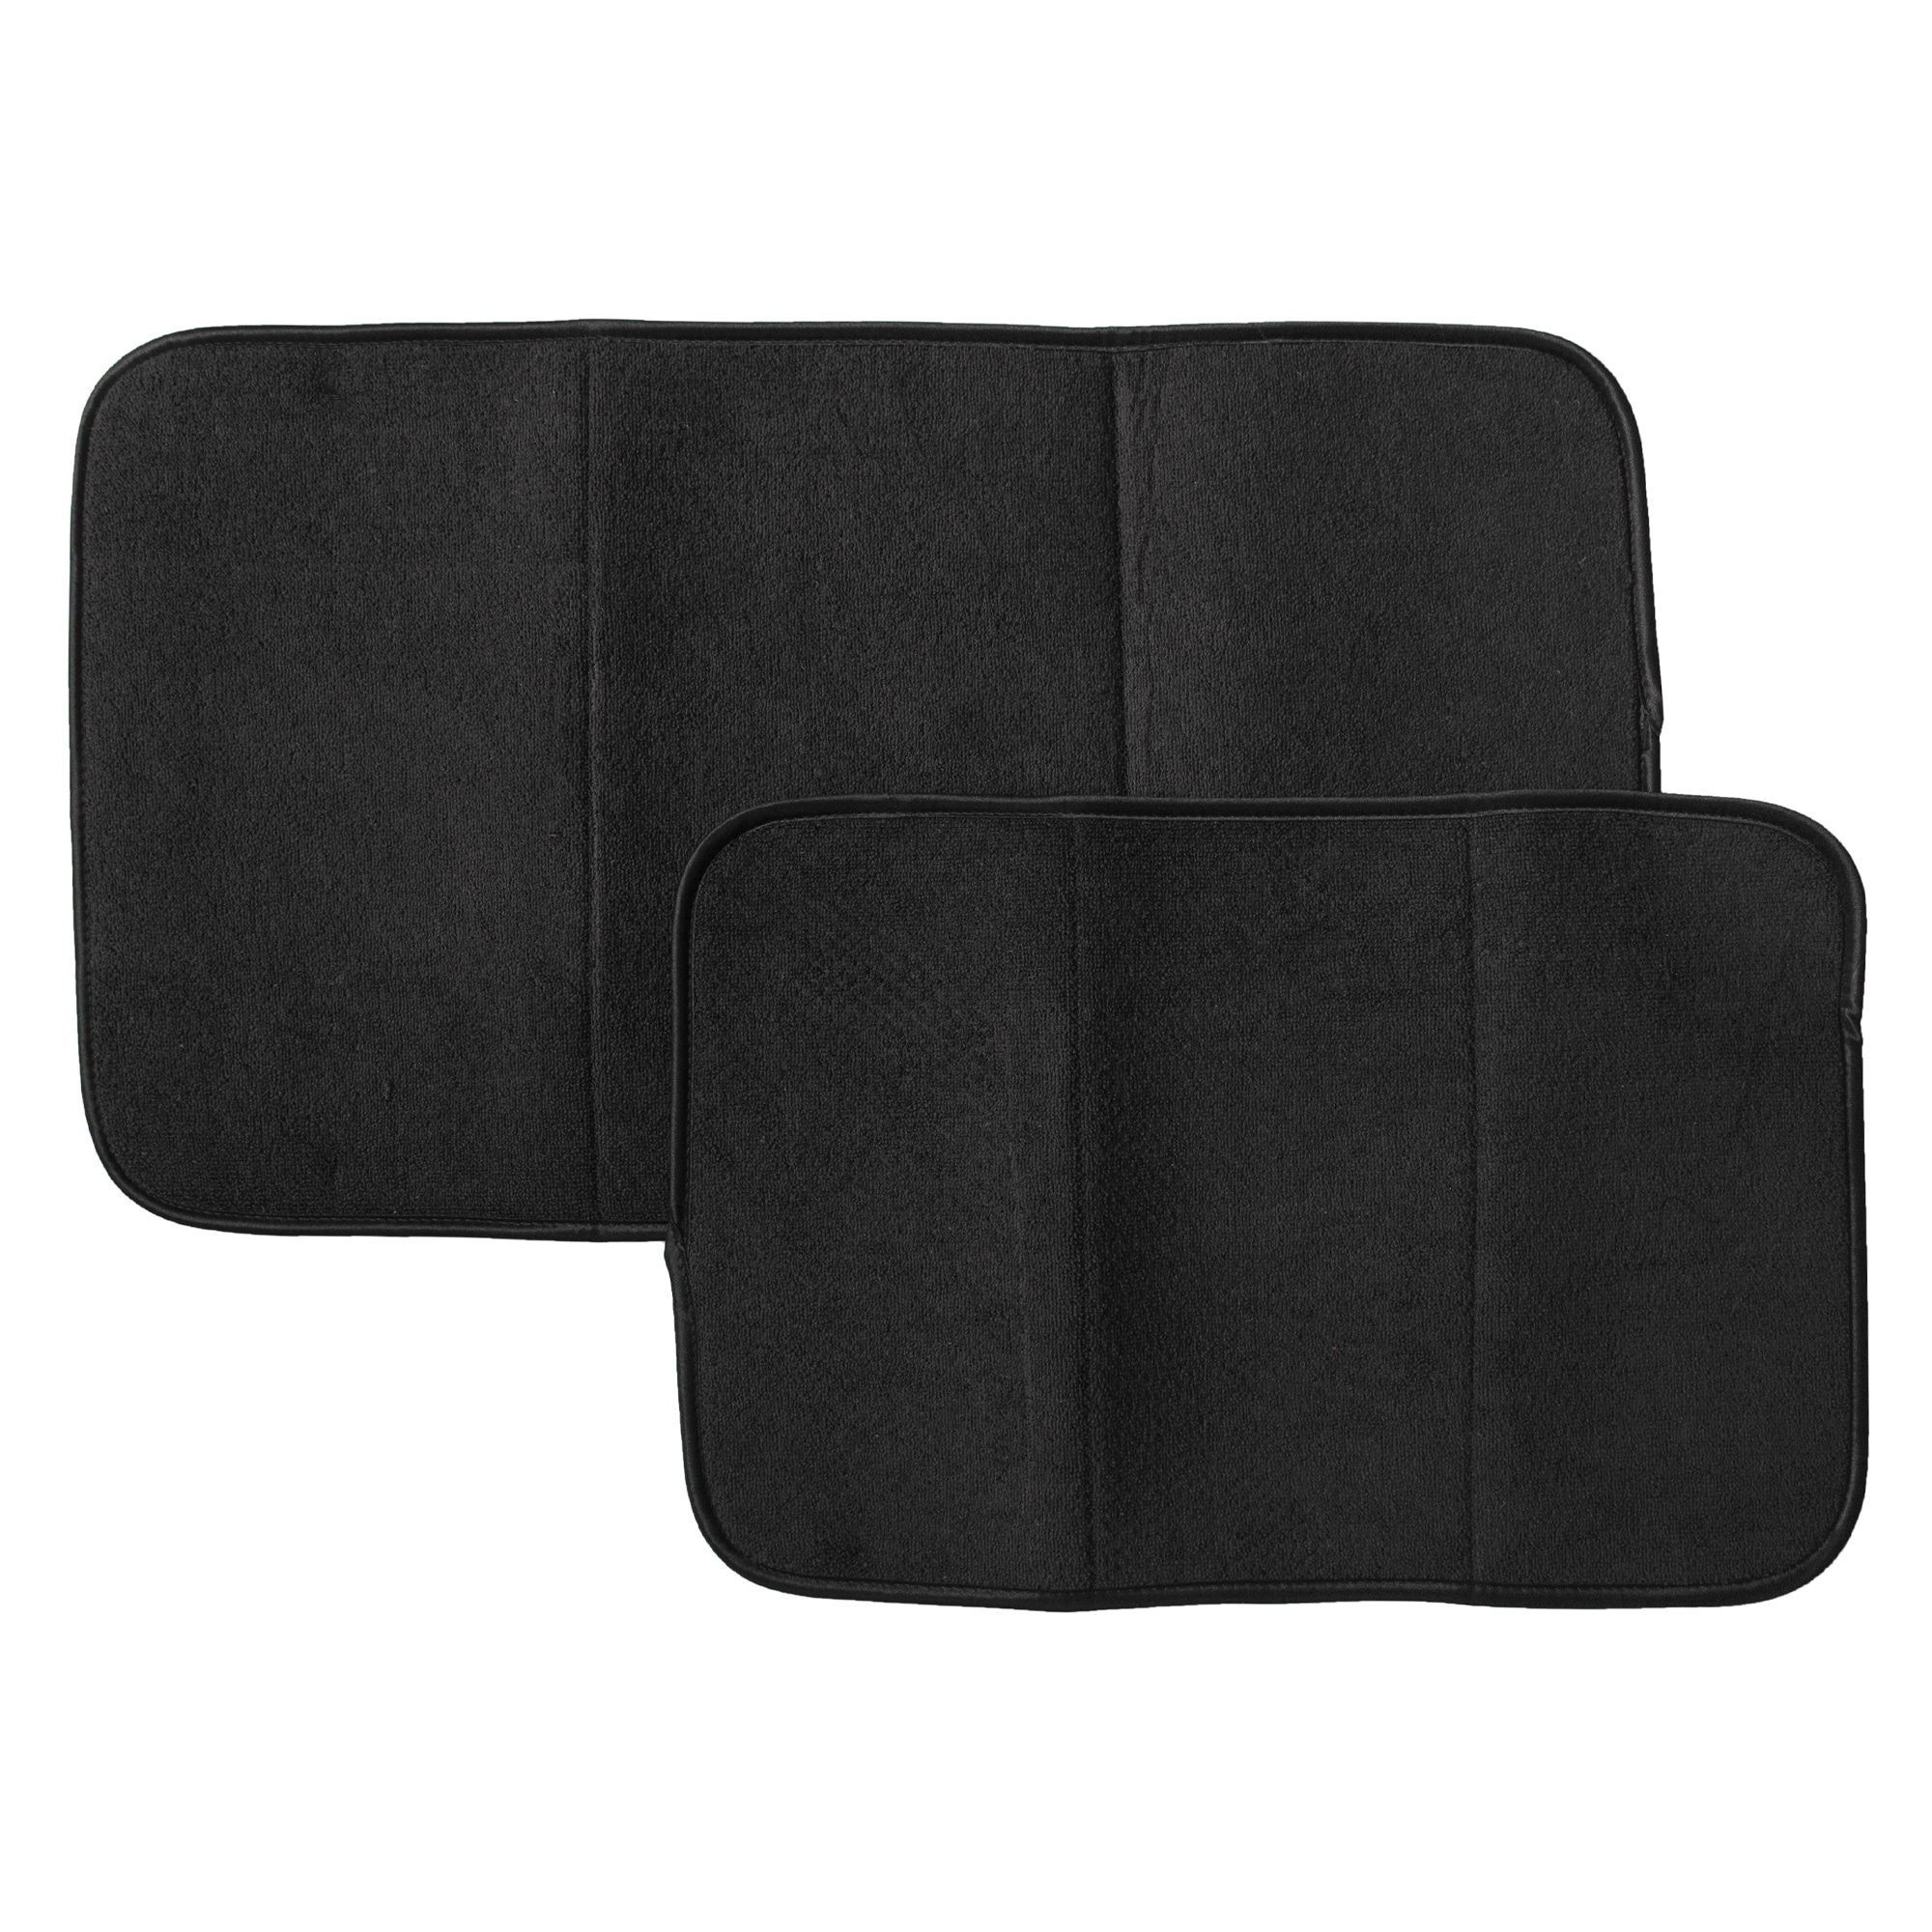 https://ak1.ostkcdn.com/images/products/is/images/direct/b1afff06ecf684ffd18586022cb96d013c15aea0/T-fal-Textiles-Microfiber-Dish-Drying-Mat-Reverses-to-Mesh%2C-2-Piece-Set.jpg